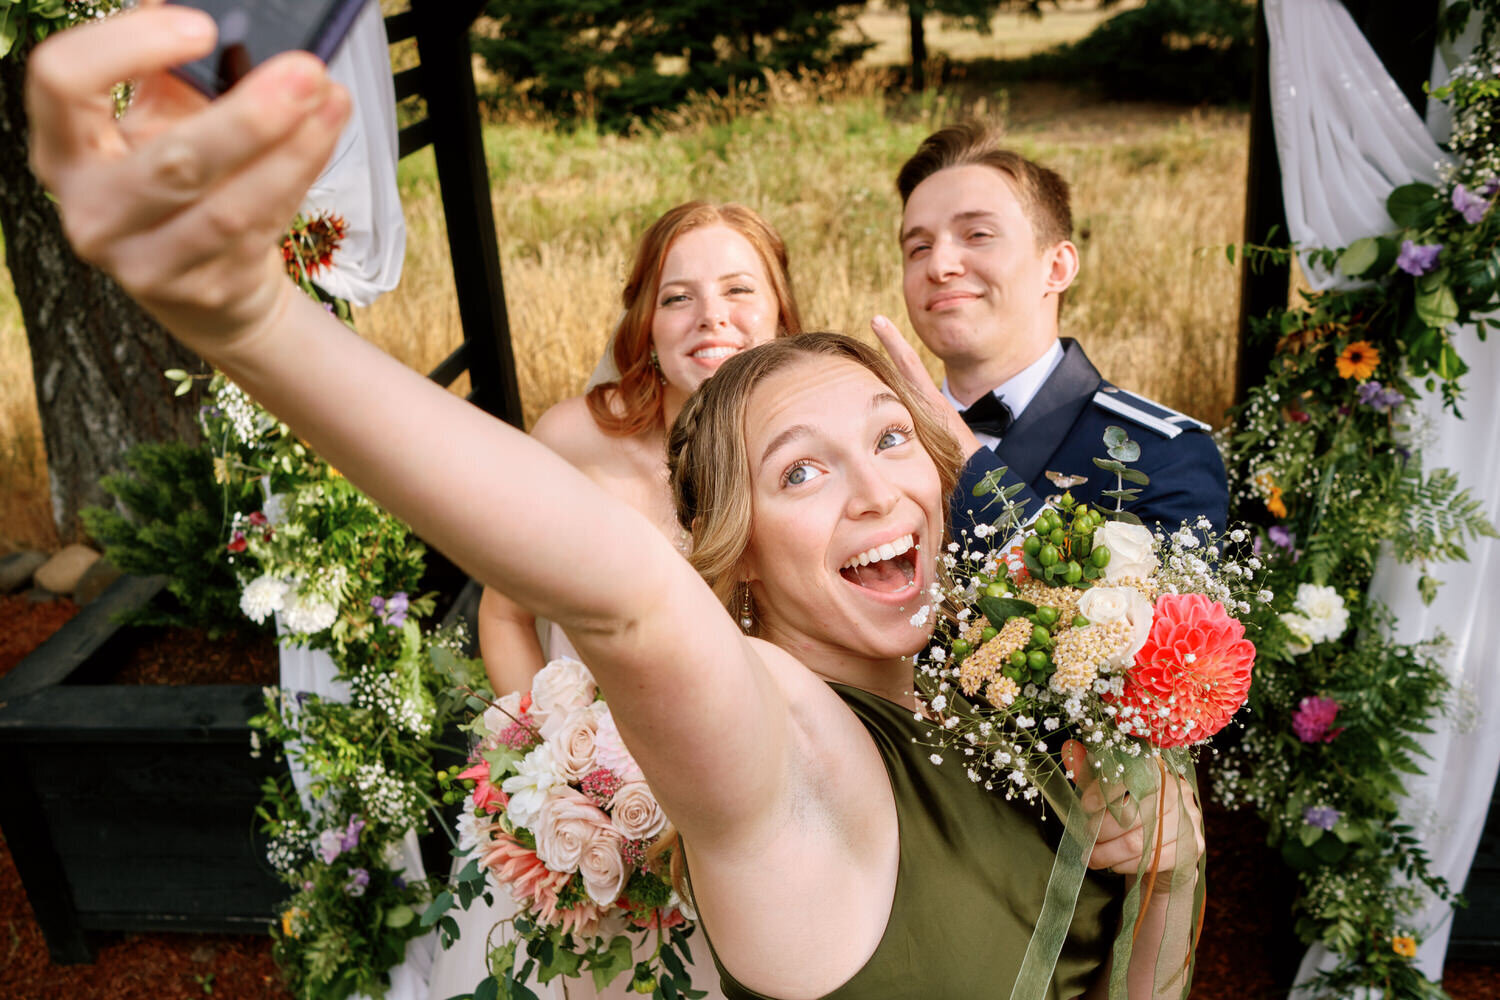 Bridesmaid holds her phone up to take a selfie with the bride and groom